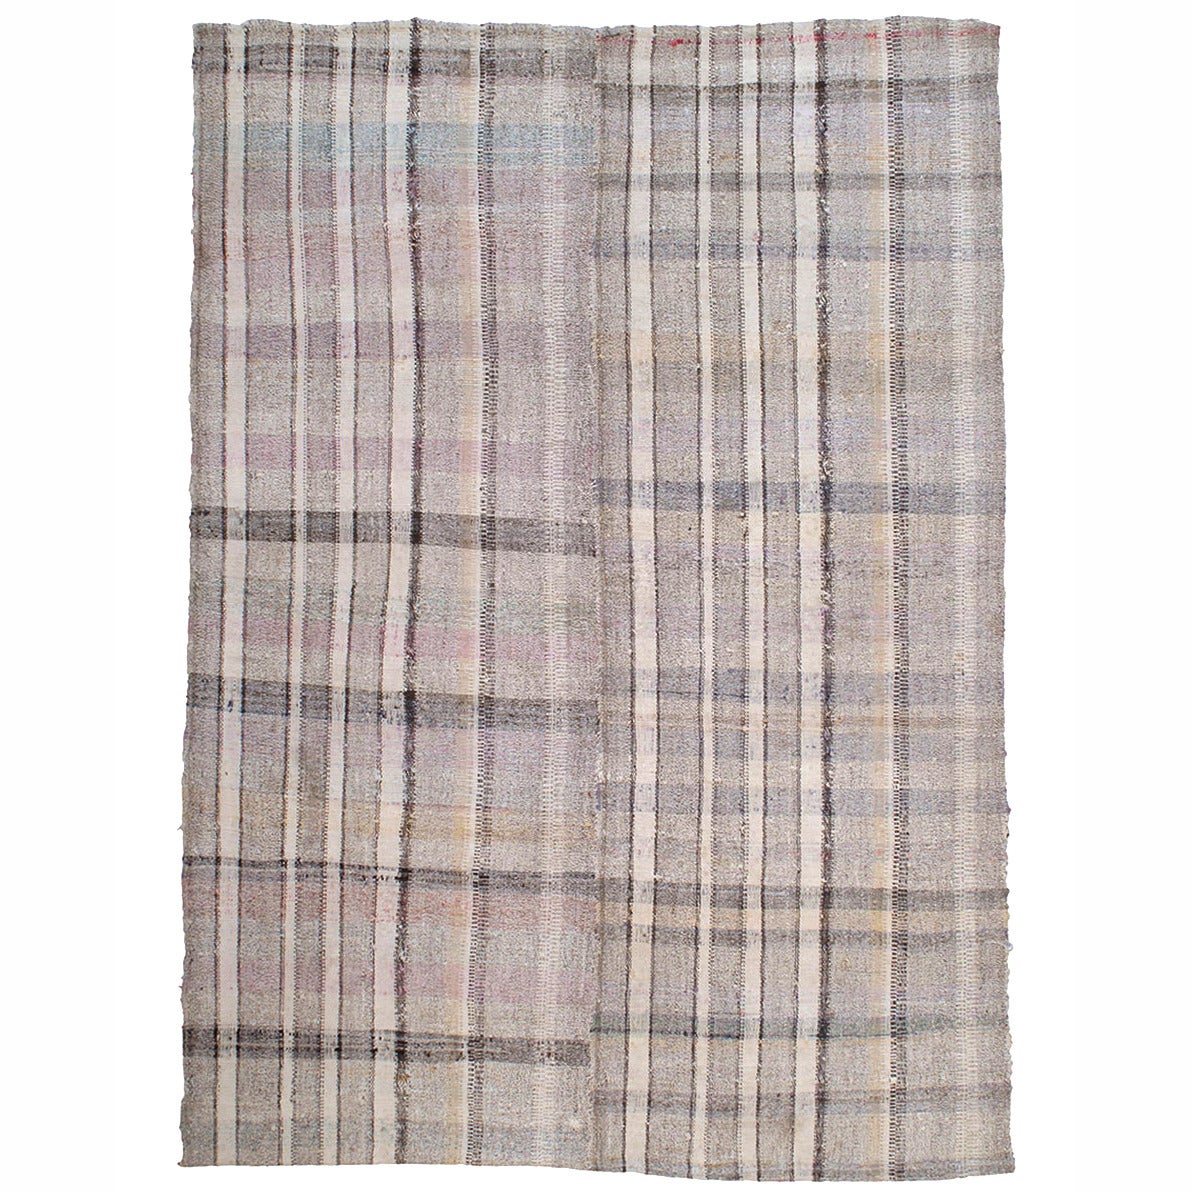 Cotton and Goat Hair Kilim in Plaid